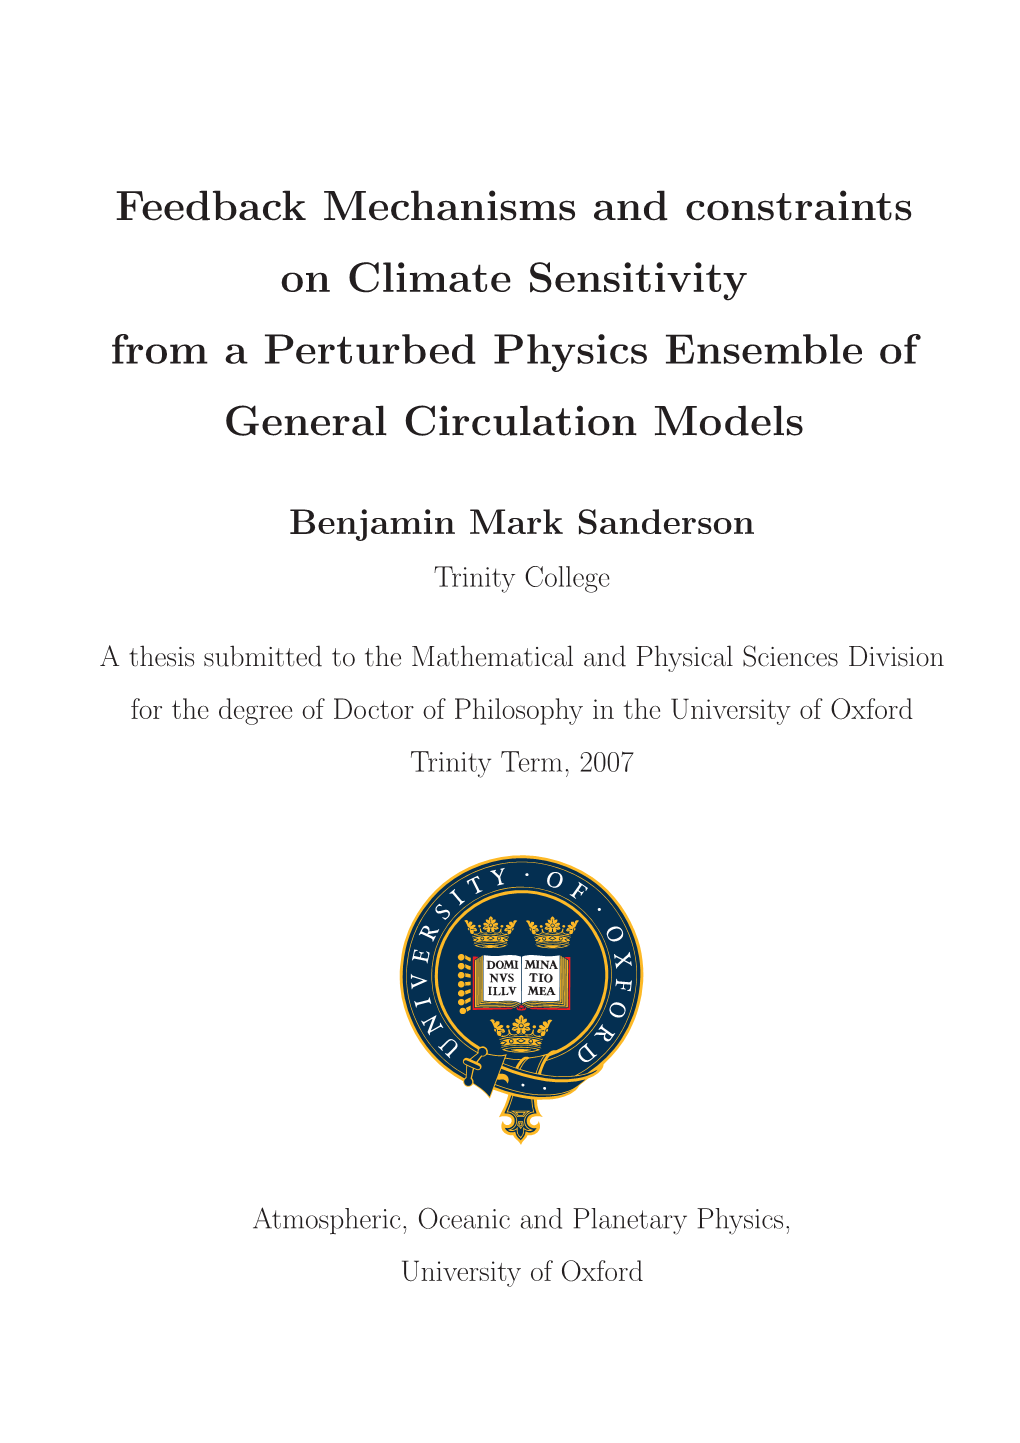 Feedback Mechanisms and Constraints on Climate Sensitivity from a Perturbed Physics Ensemble of General Circulation Models